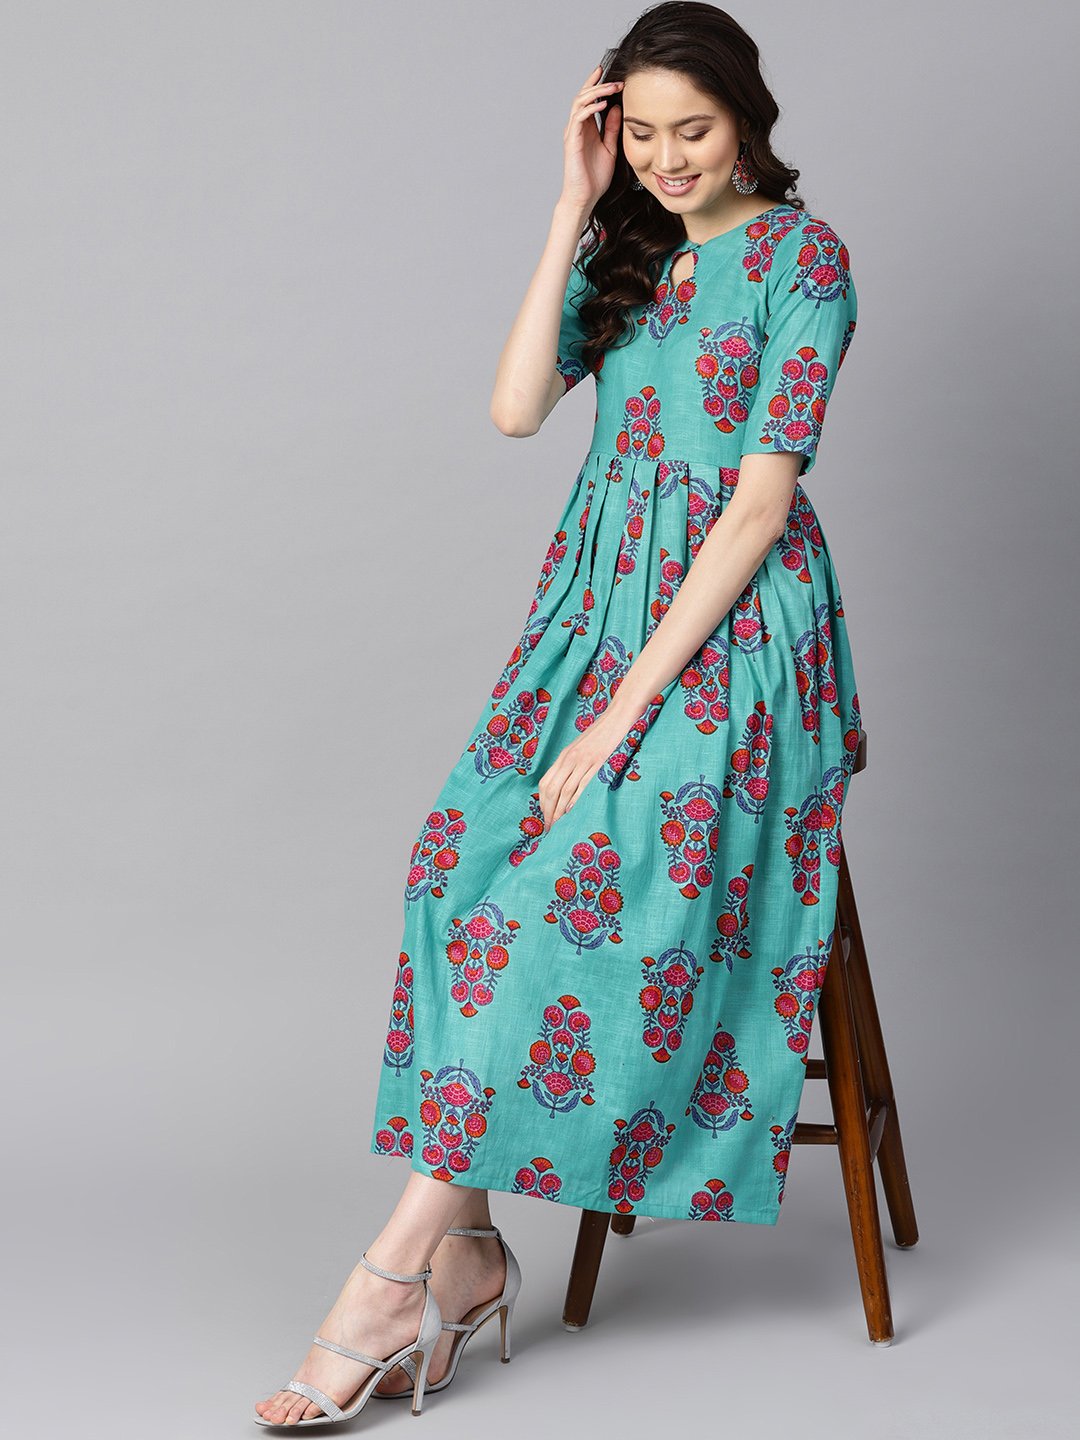 Women's Turqish Blue Color Printed Half Sleeve Pleated Maxi Dress With Deep Back And Tassel Detailing. - Nayo Clothing